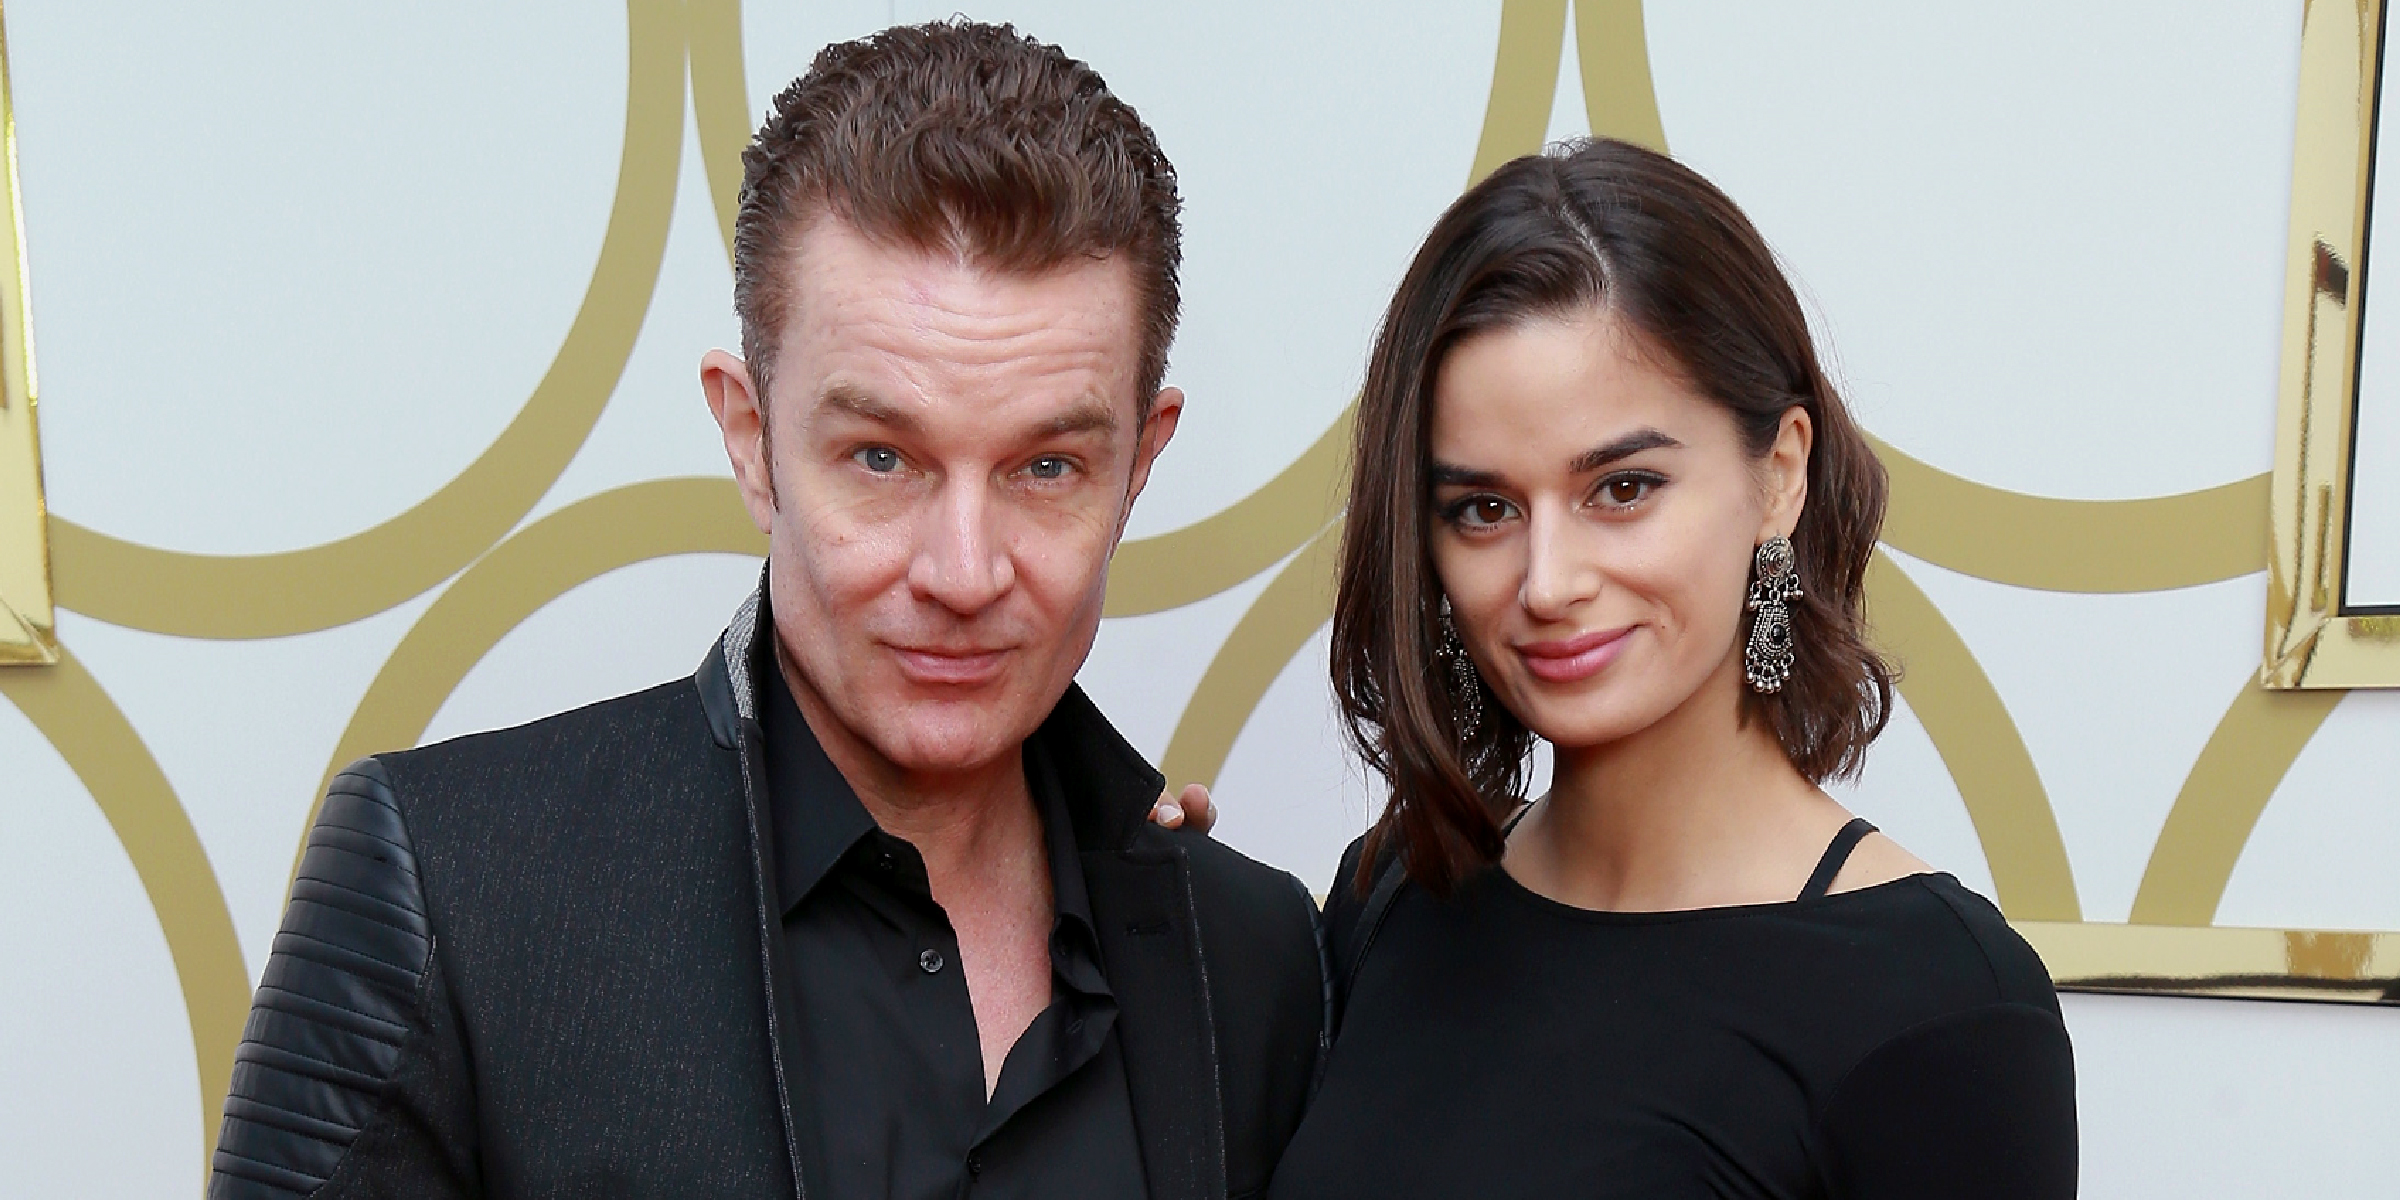 Patricia Rahman and James Marsters | Source: Getty Images